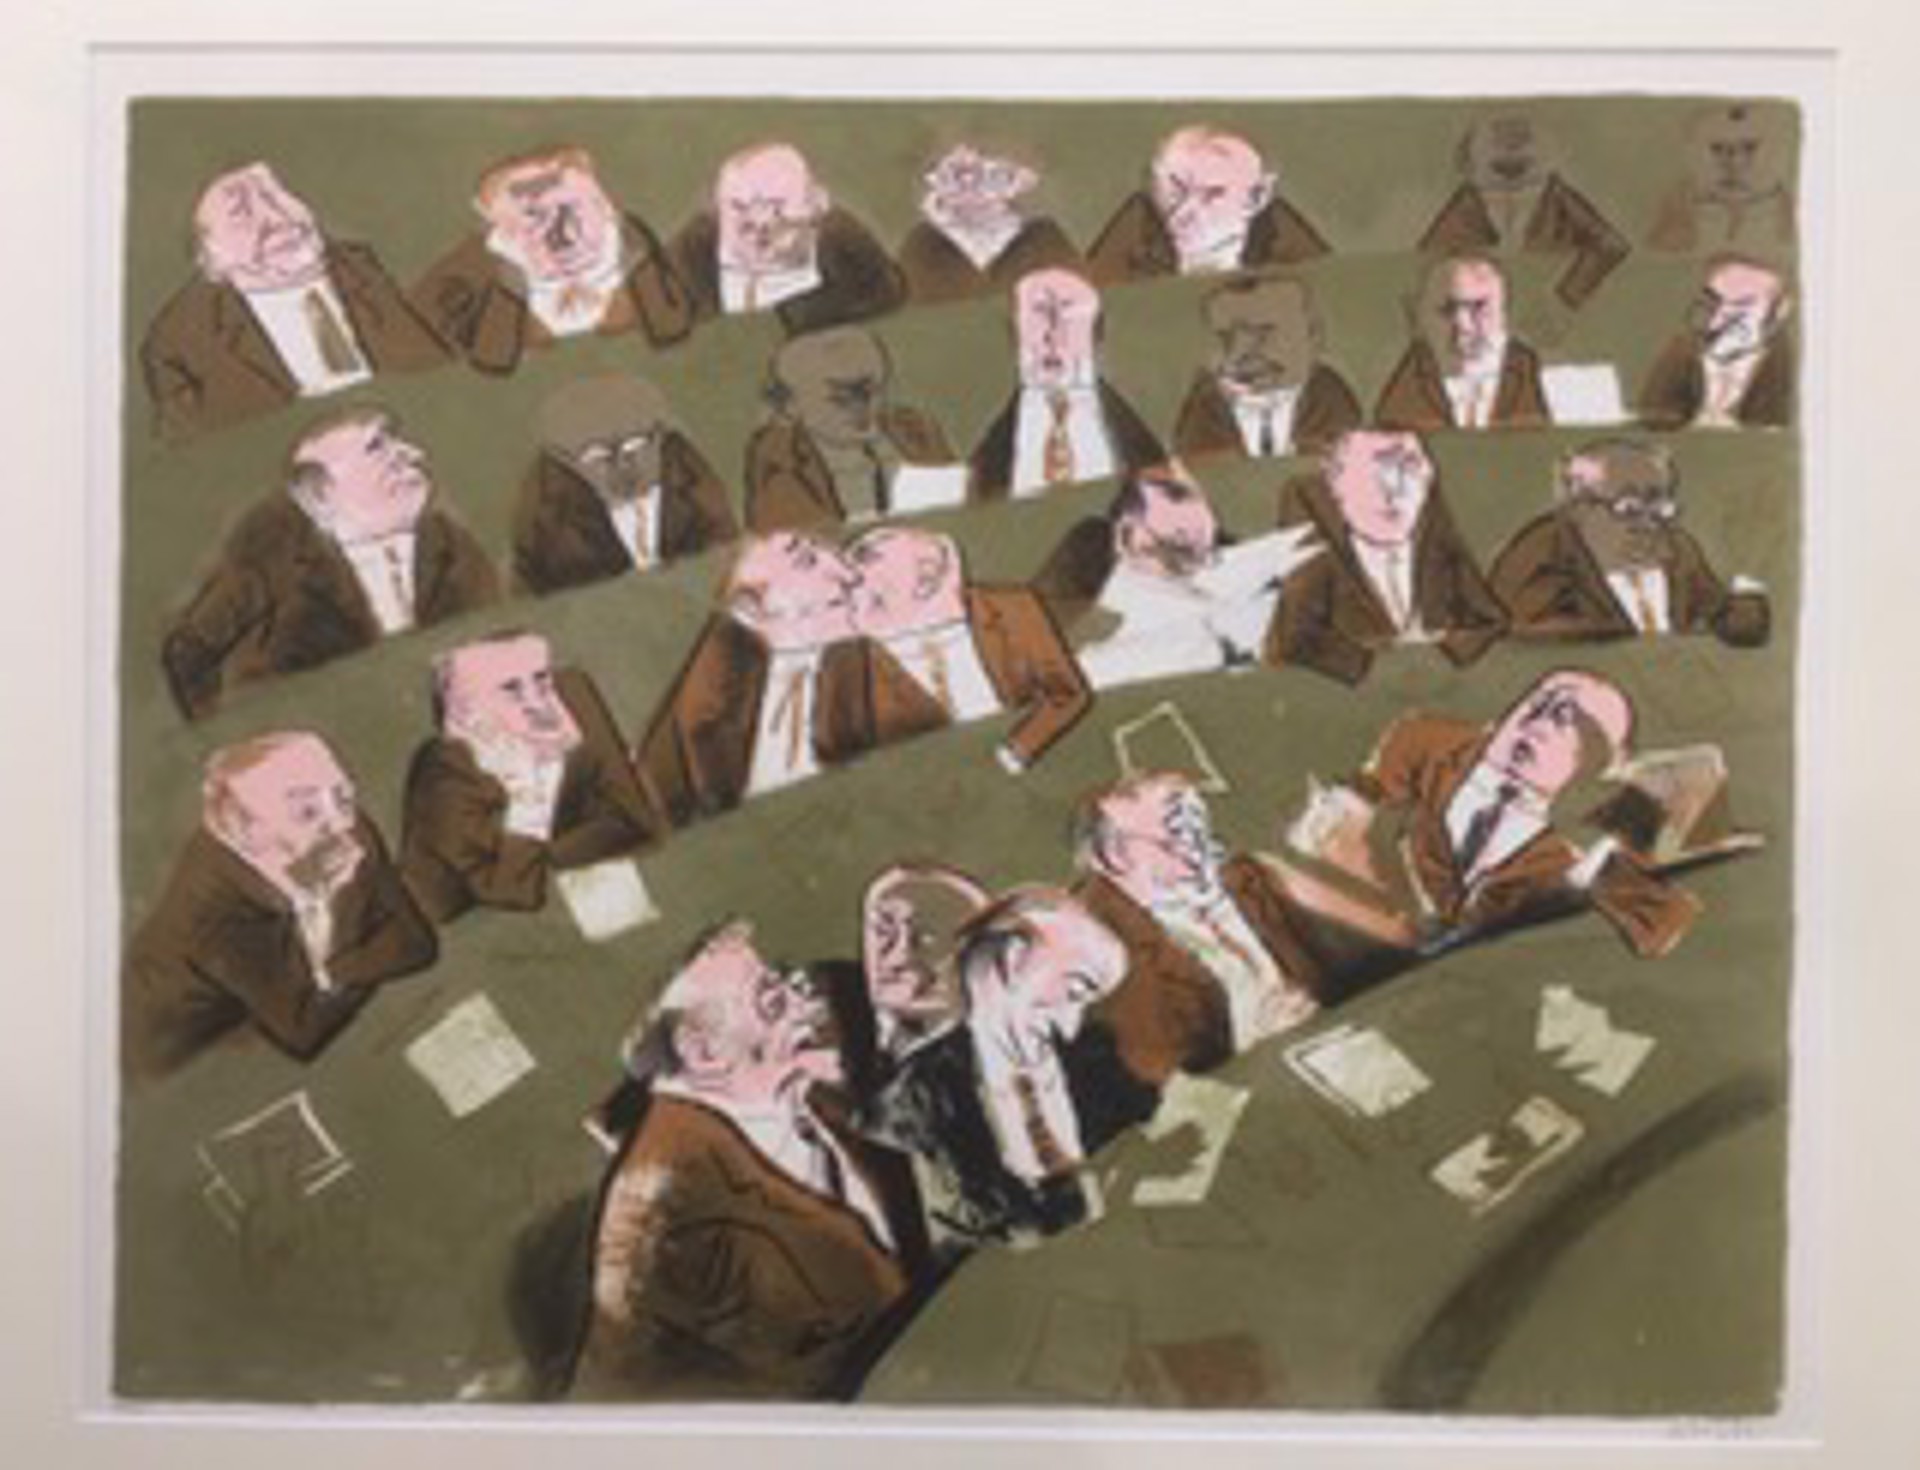 Members of the House by William Gropper